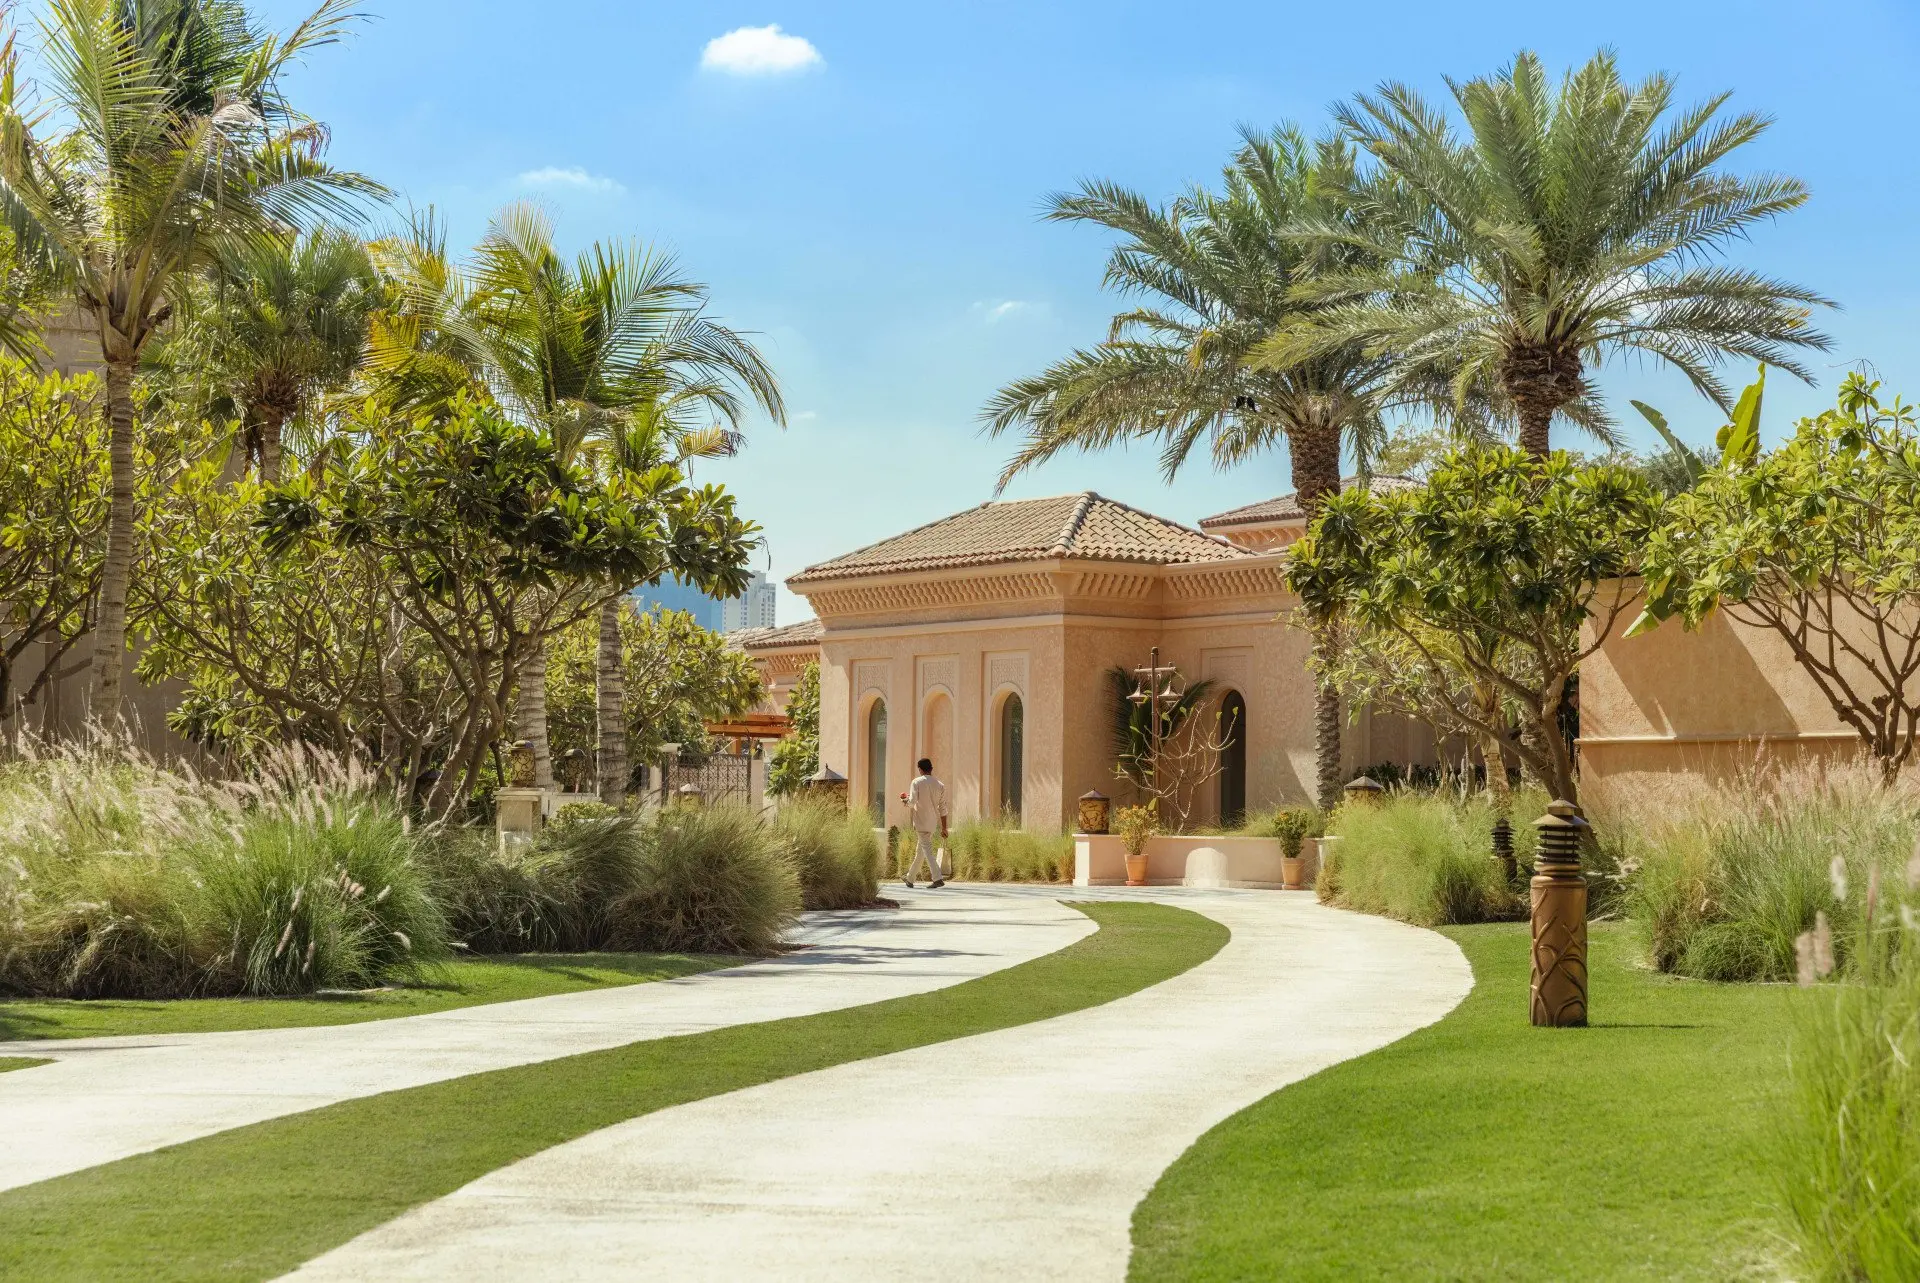 OO_ThePalm_Exteriors_Mansion_Pathway_2544_MASTER